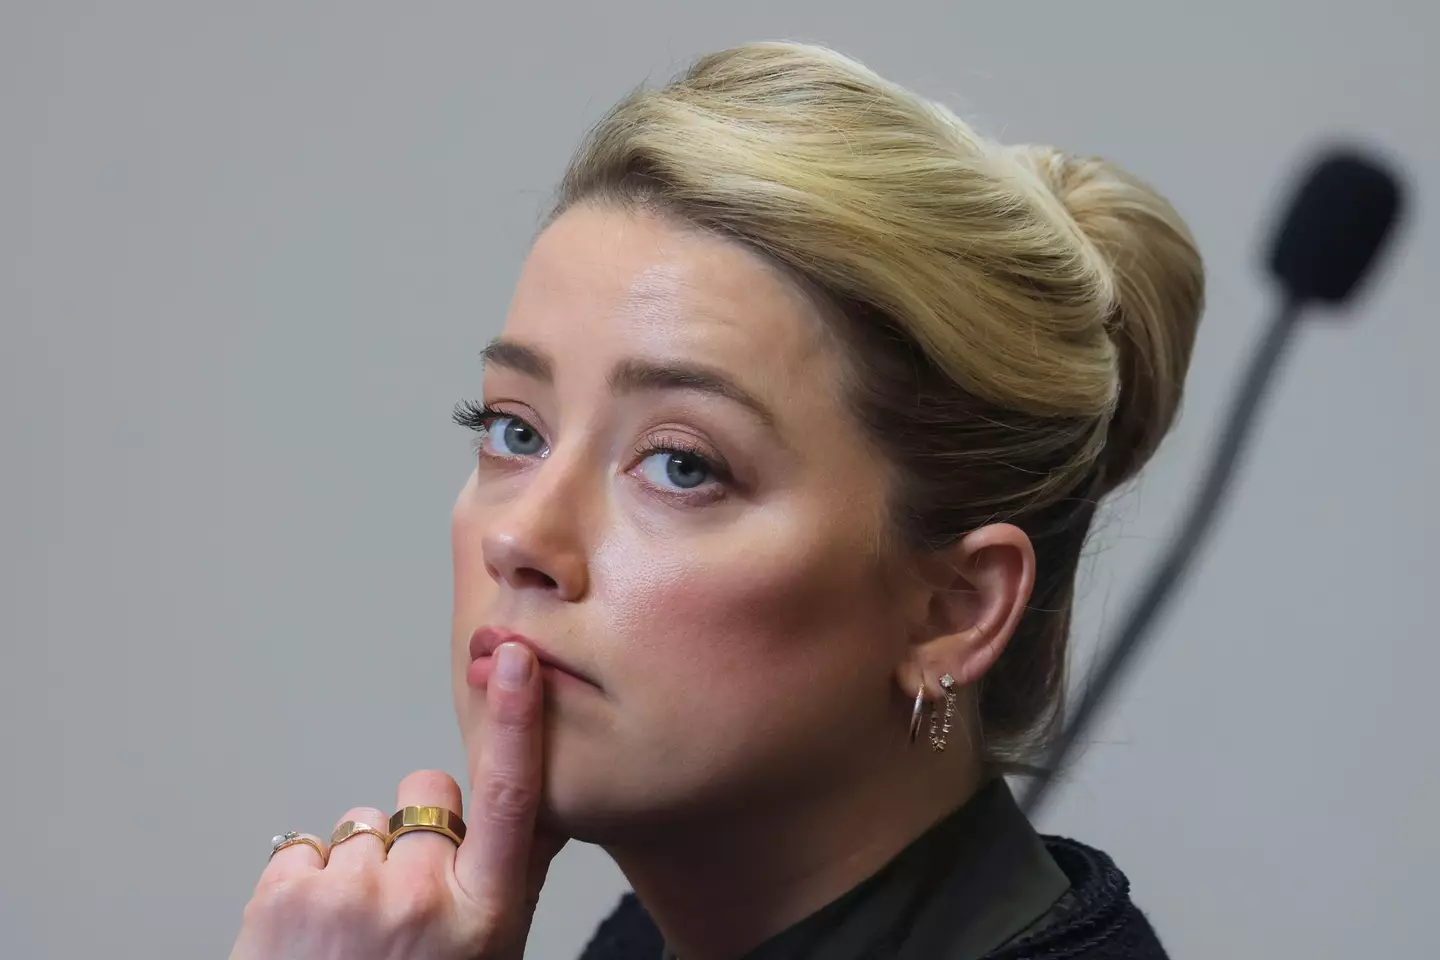 Amber Heard has spoken about the death threats she has received.